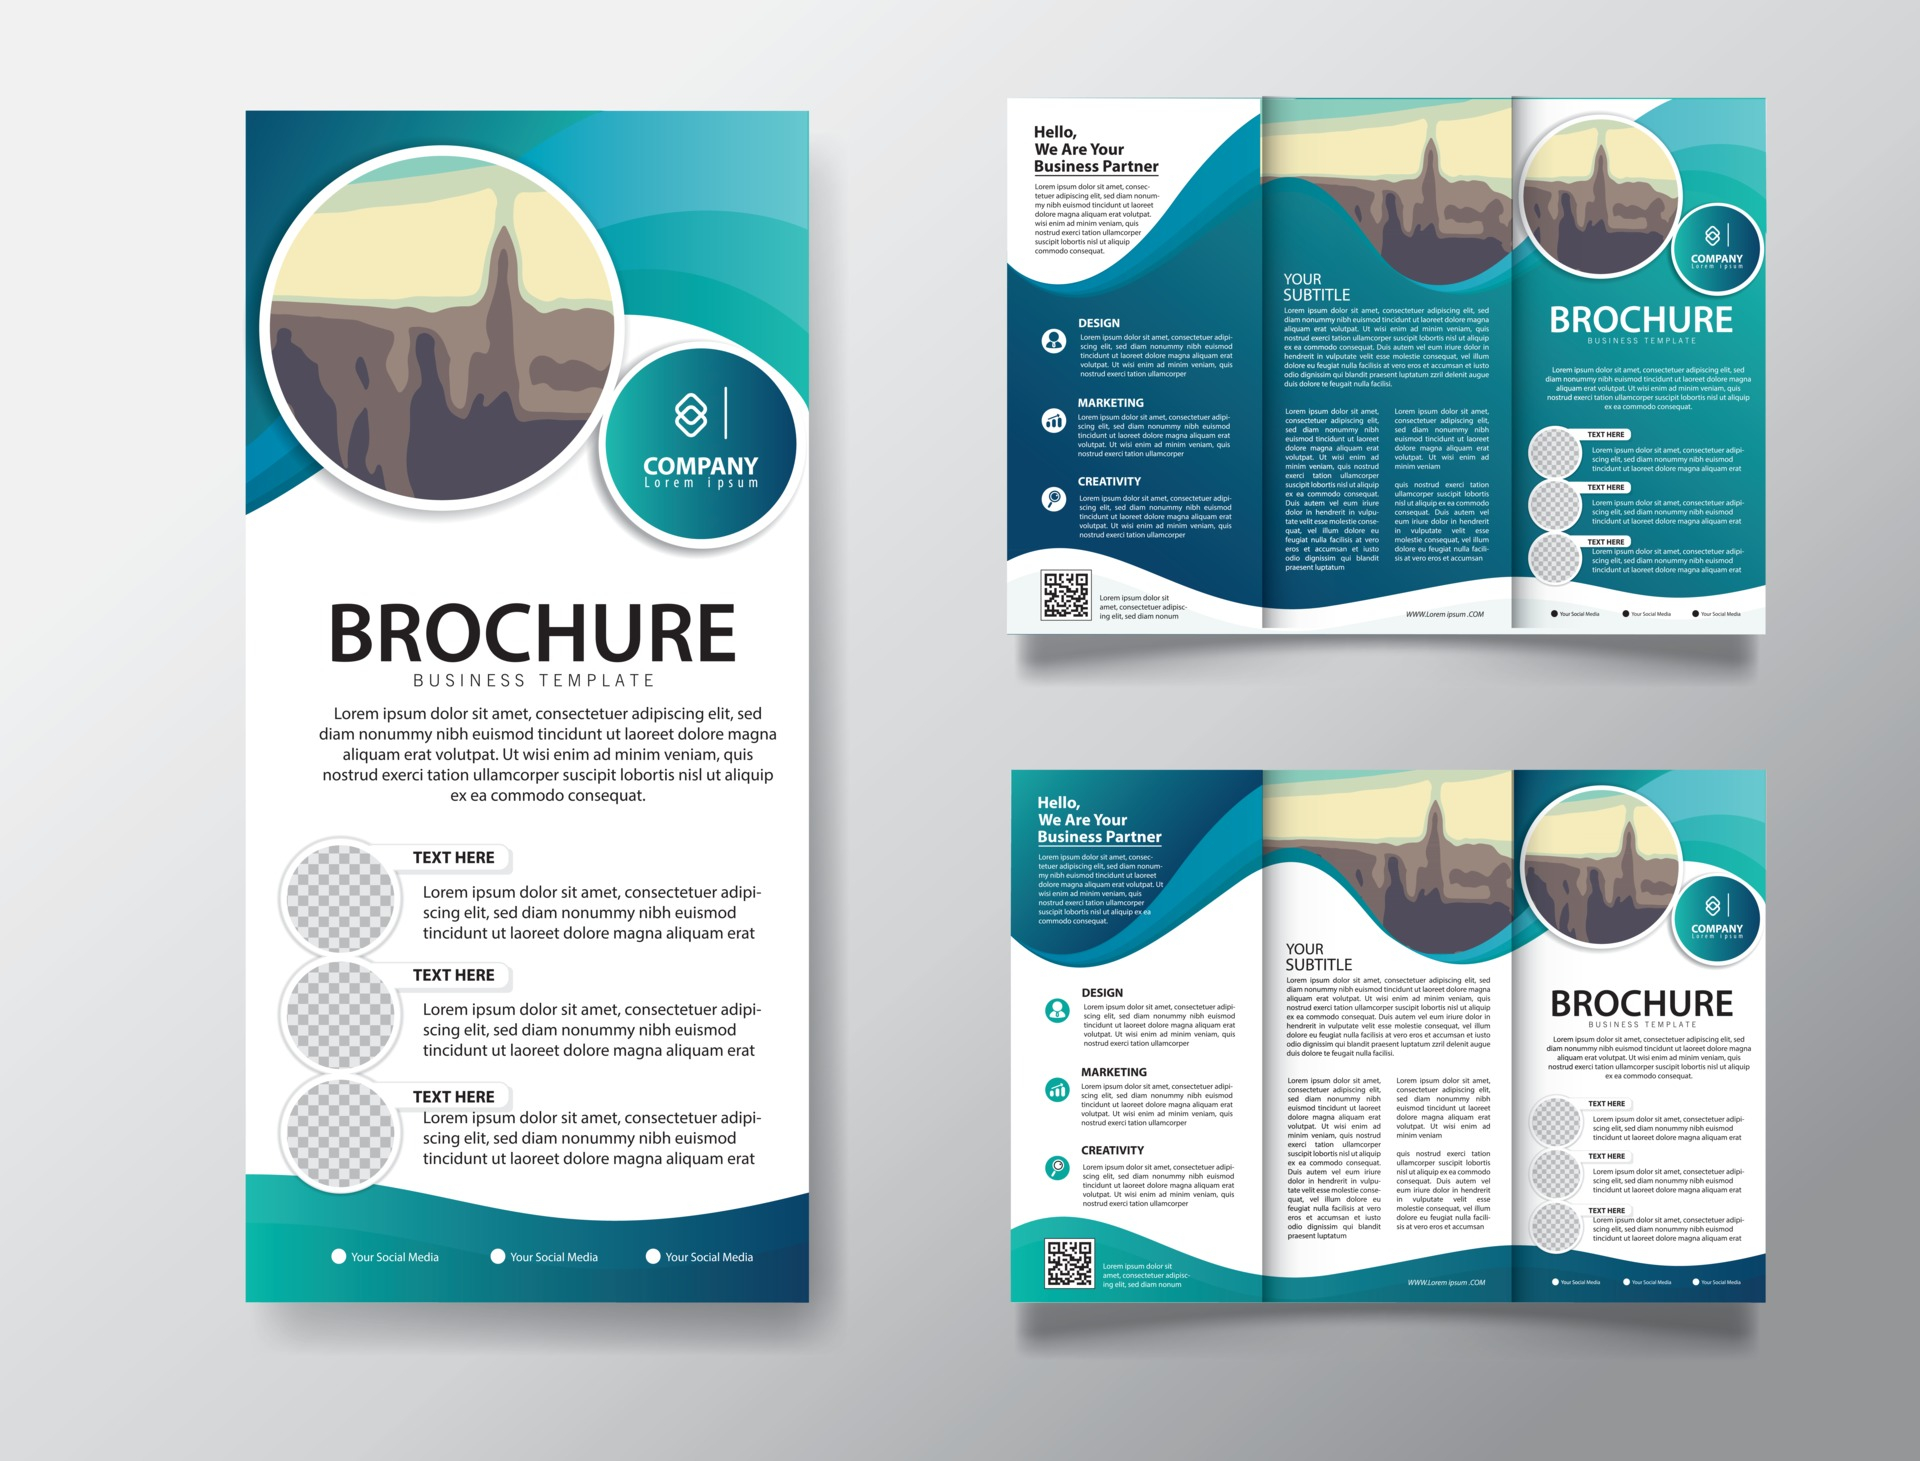 Brochure Vector Art, Icons, and Graphics for Free Download Regarding Free Illustrator Brochure Templates Download